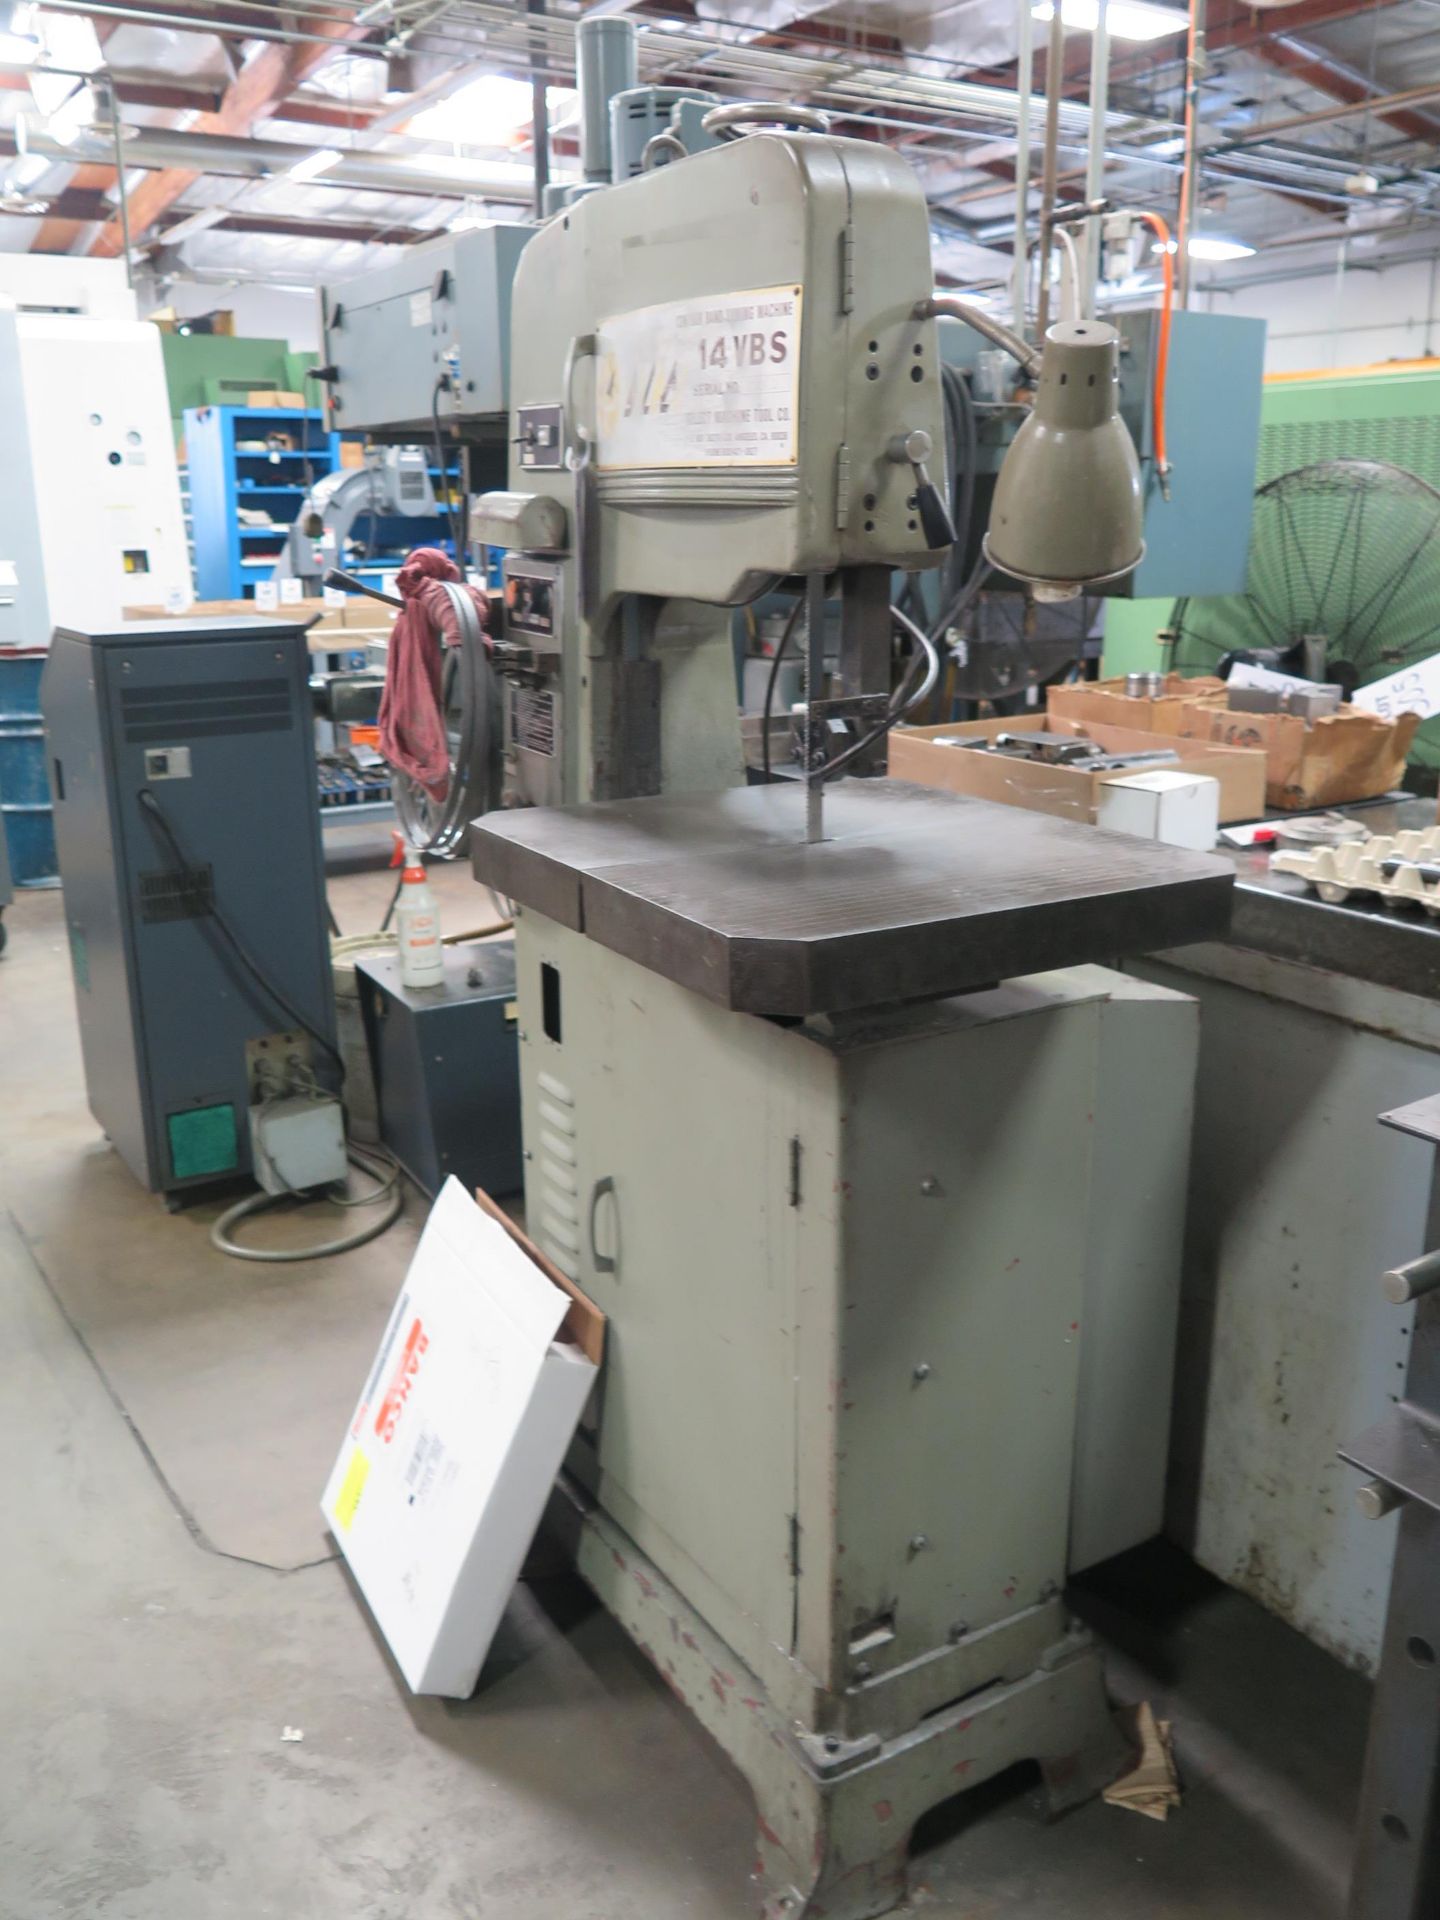 SELECT MACHINE TOOL MDL. 14VBS 14” VERTICAL BAND SAW S/N 35565 W/ BLADE WELDER, 20” X 22” TABLE - Image 3 of 4